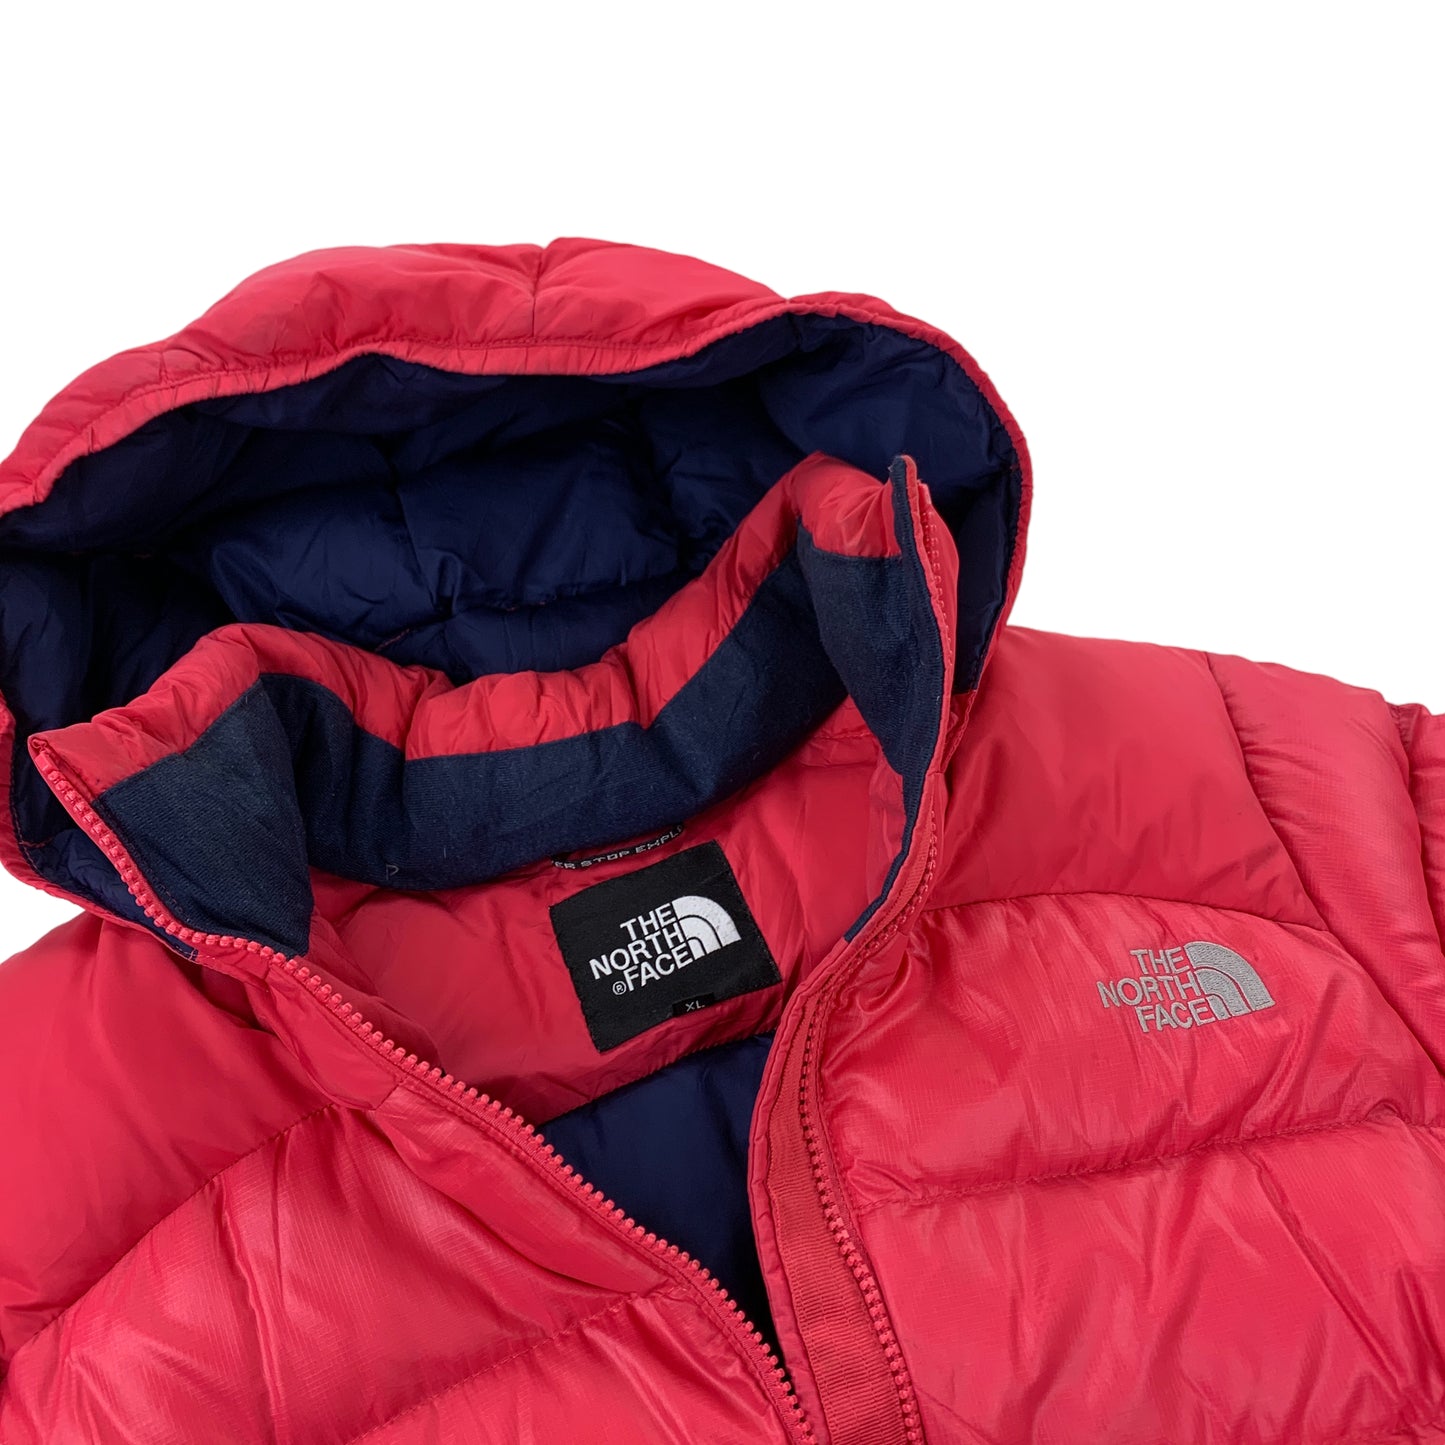 The North Face 700 Puffer Jacket - Women L